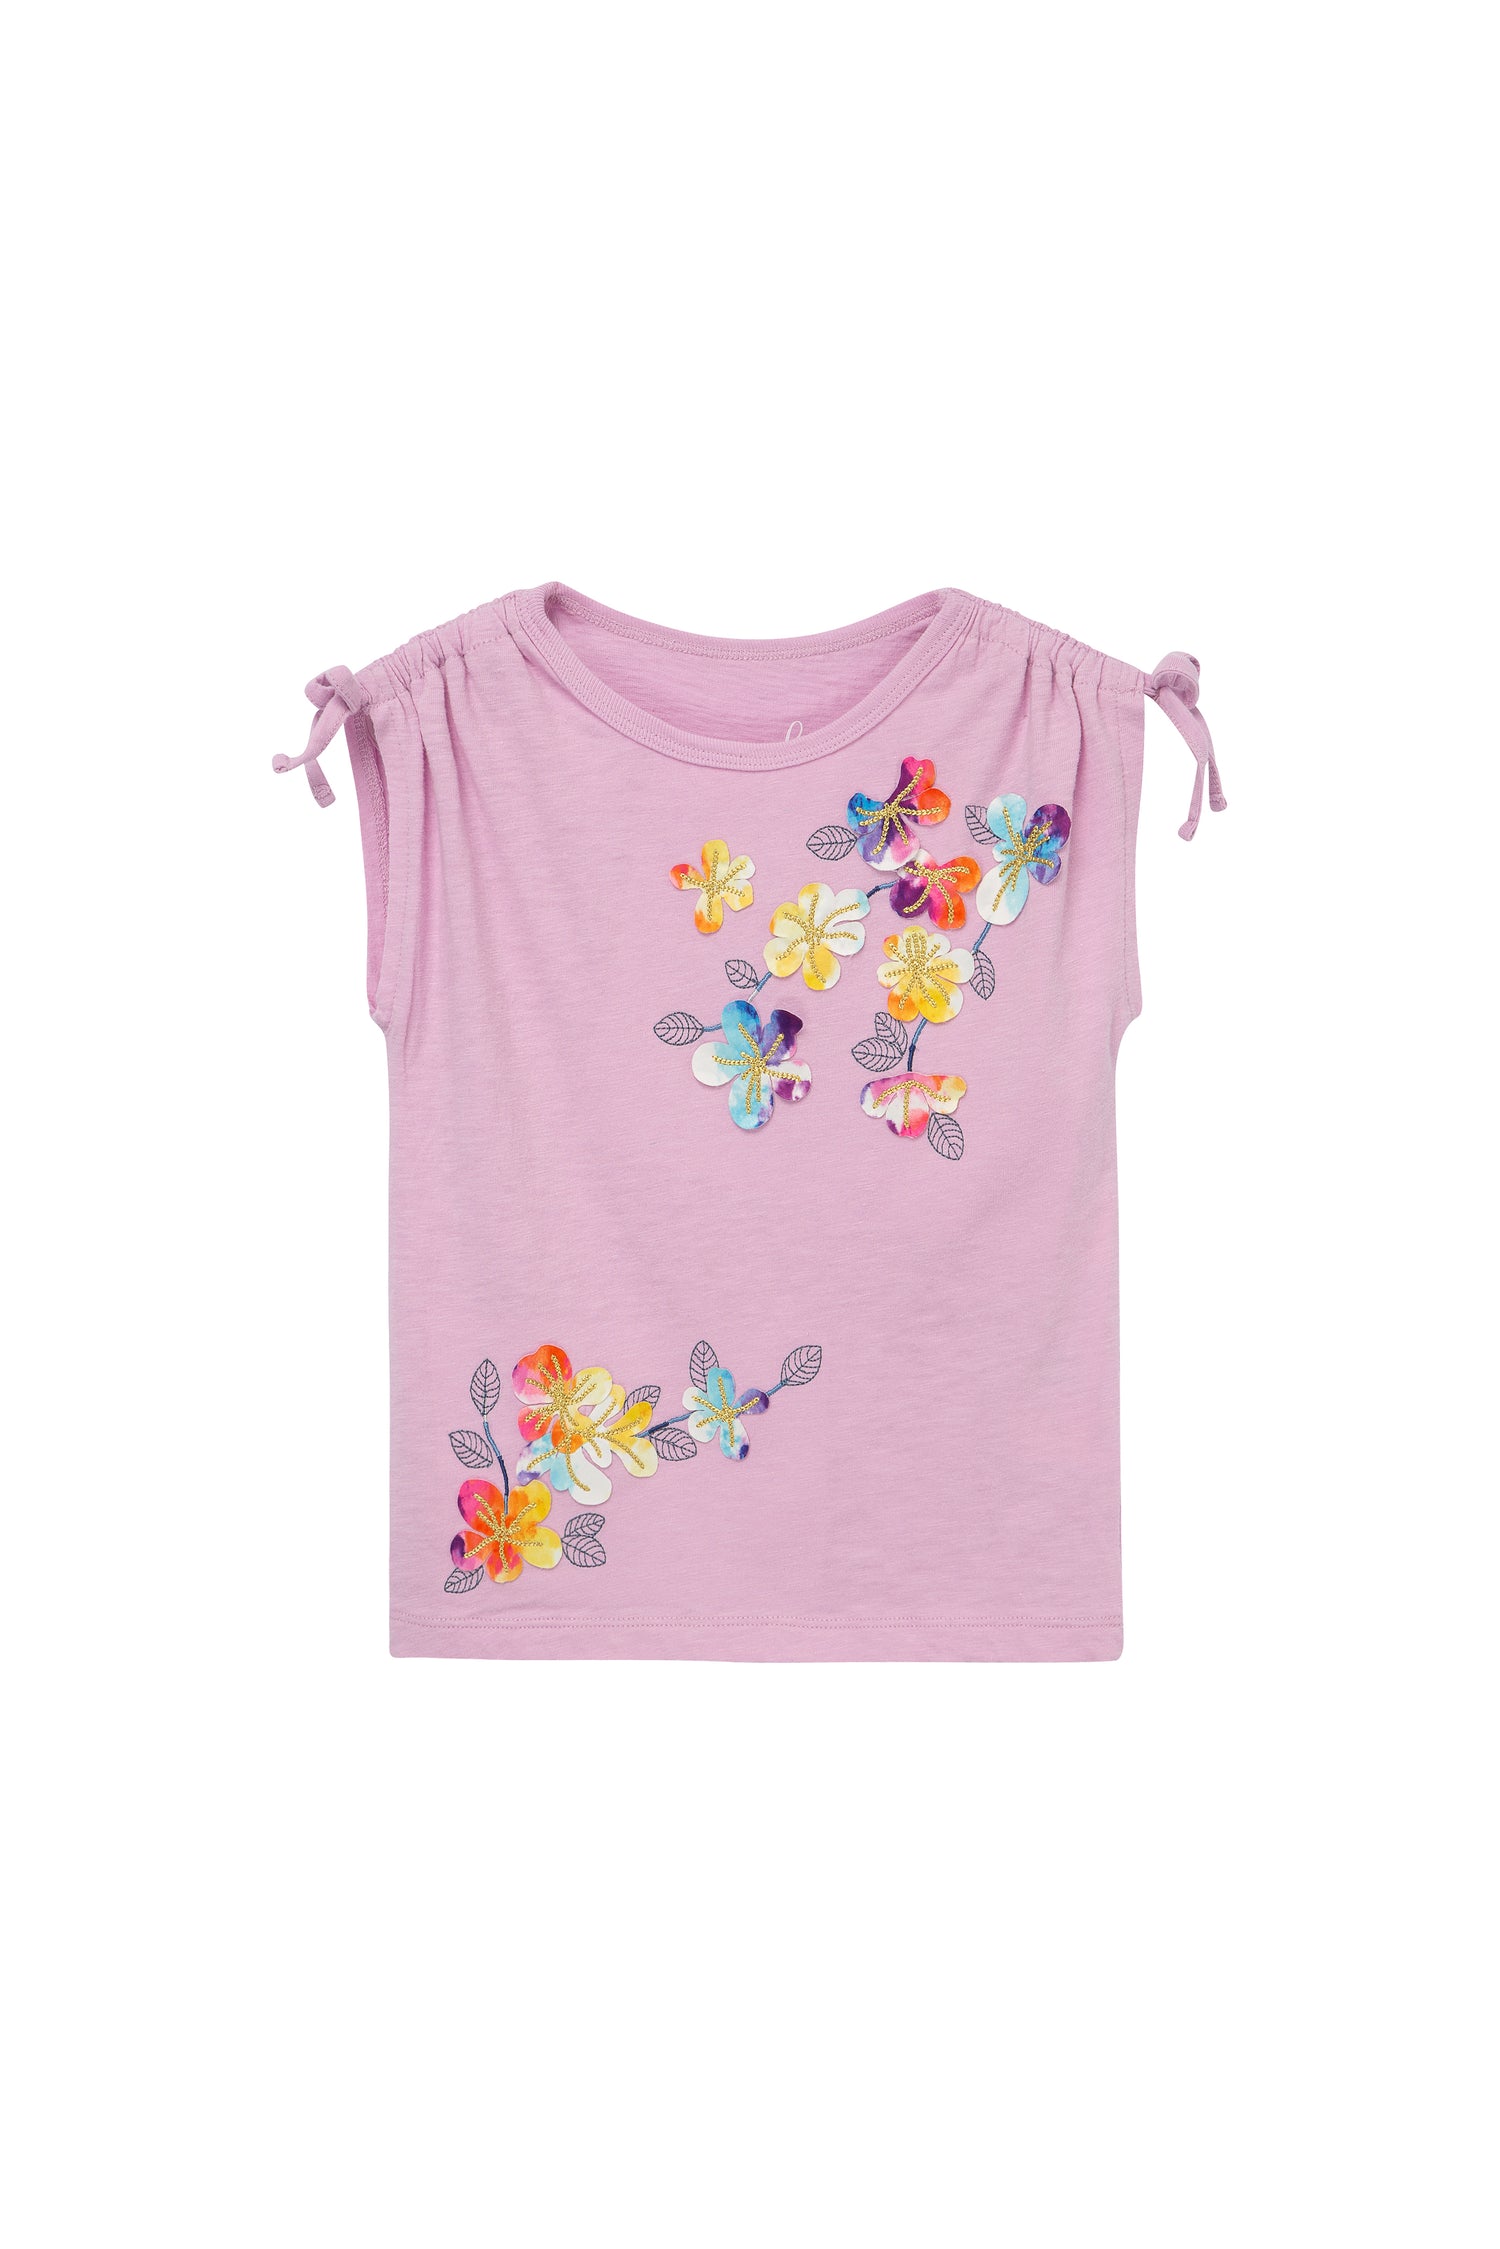 PINK SHORT-SLEEVE TOP WITH APPLIQUED FLOWERS